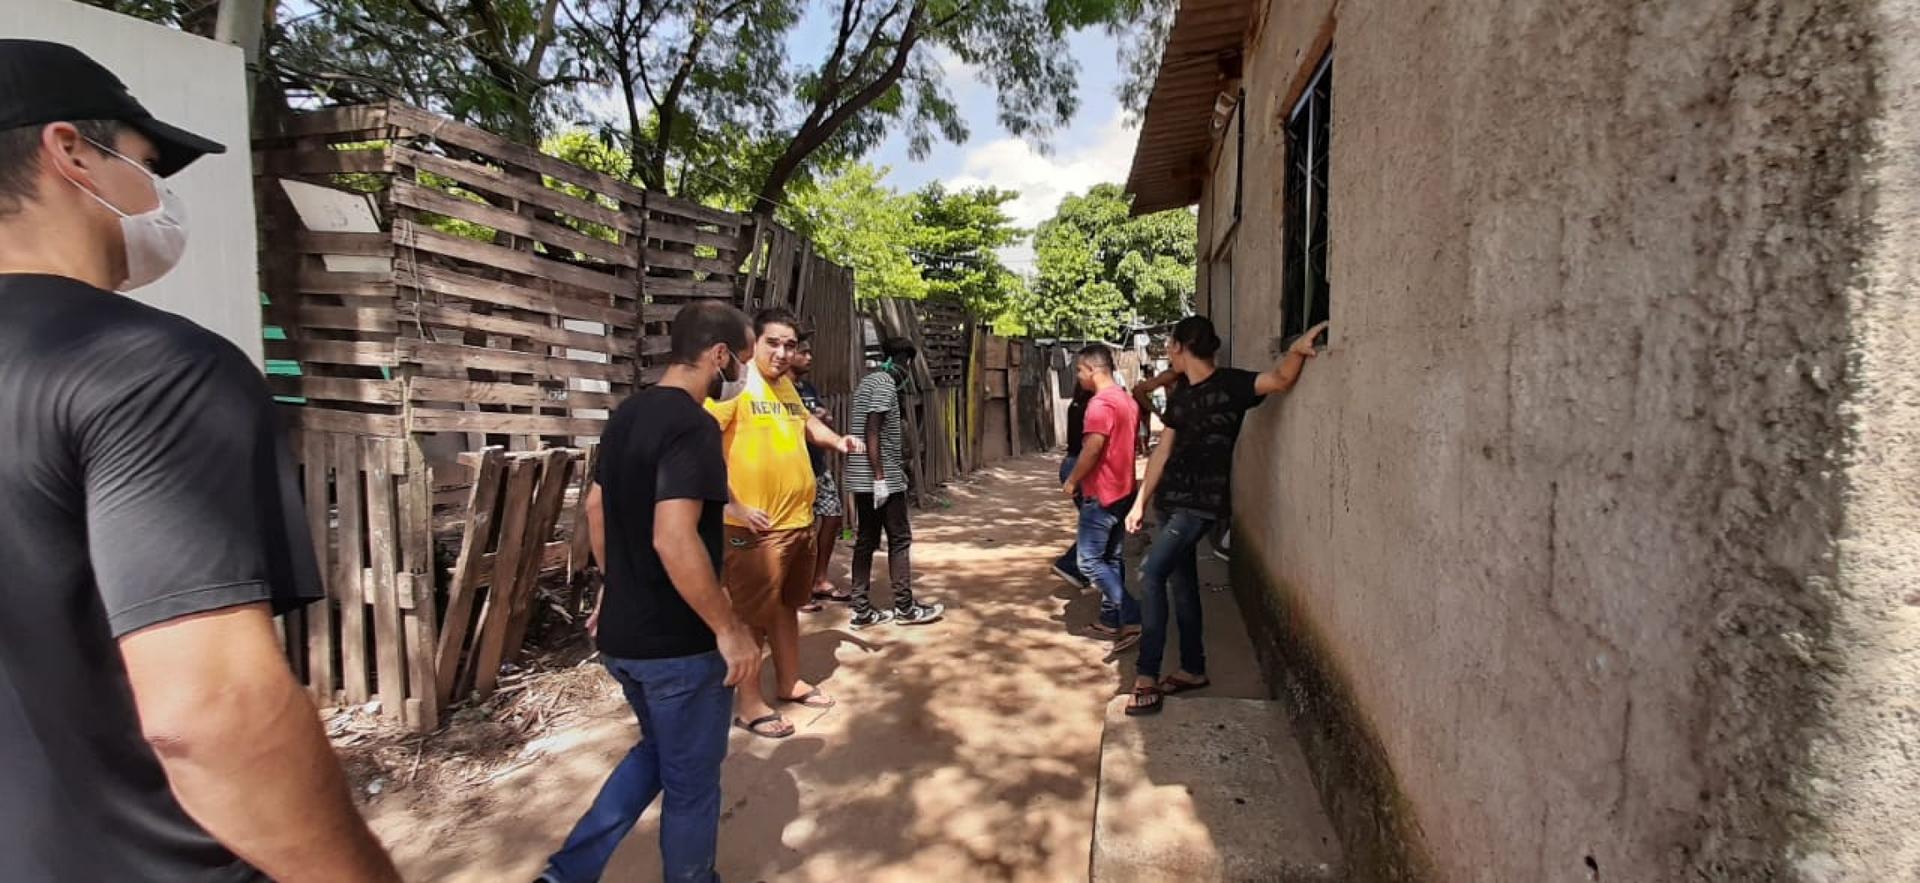 Many residents in vulnerable Brazilian communities are afraid not only of the coronavirus, but of simply surviving and not having enough to eat. A delivery of food was made Sunday in Parque das Missoes. 